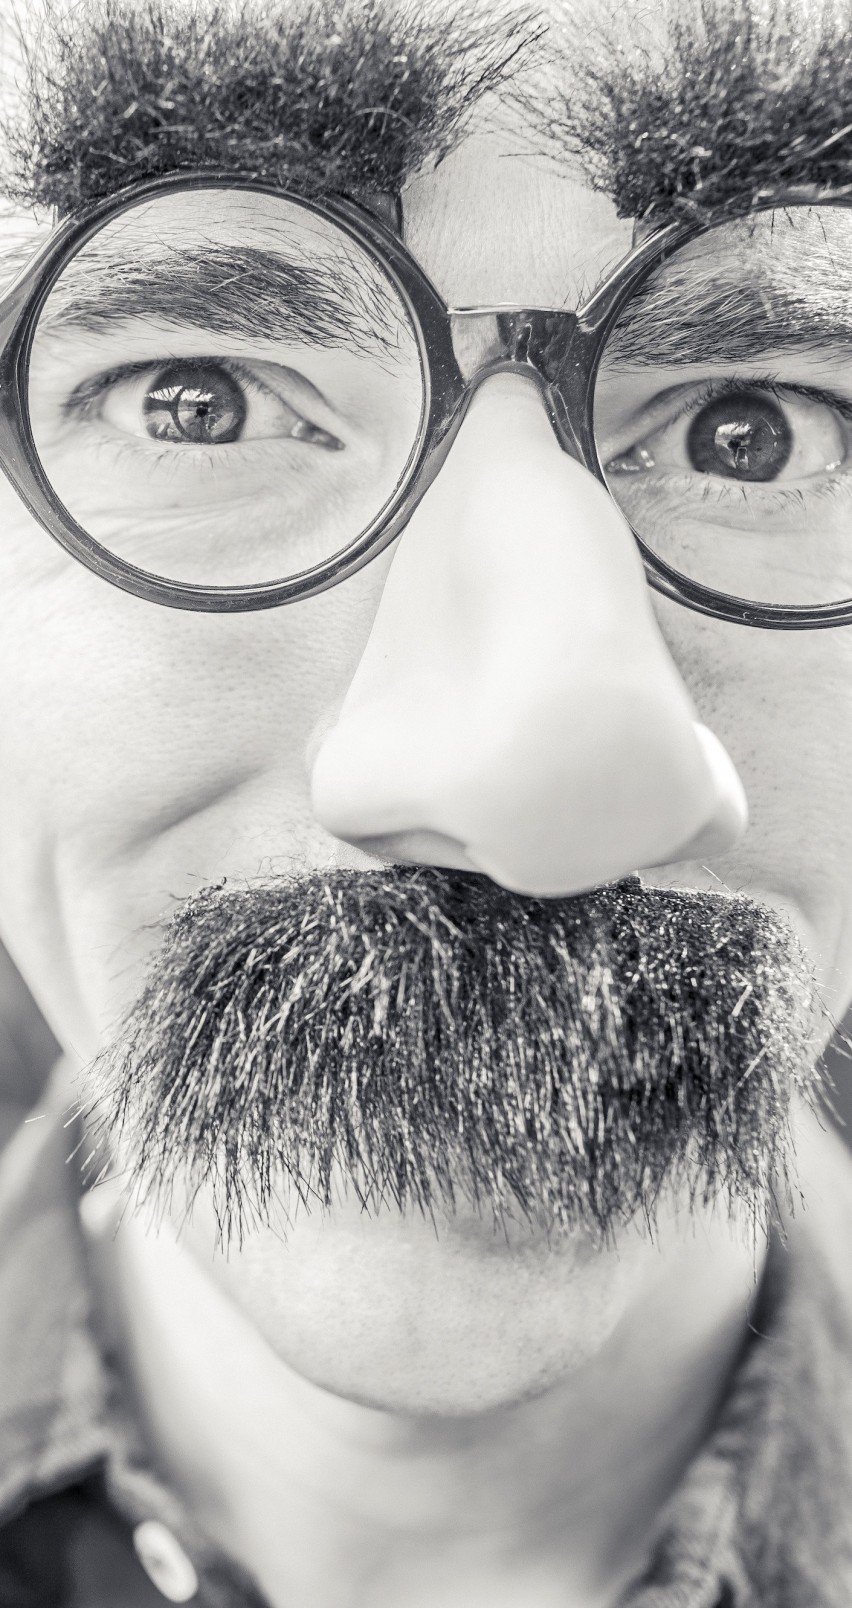 Groucho Glasses Man Wallpaper for Apple iPhone 6 / 6s